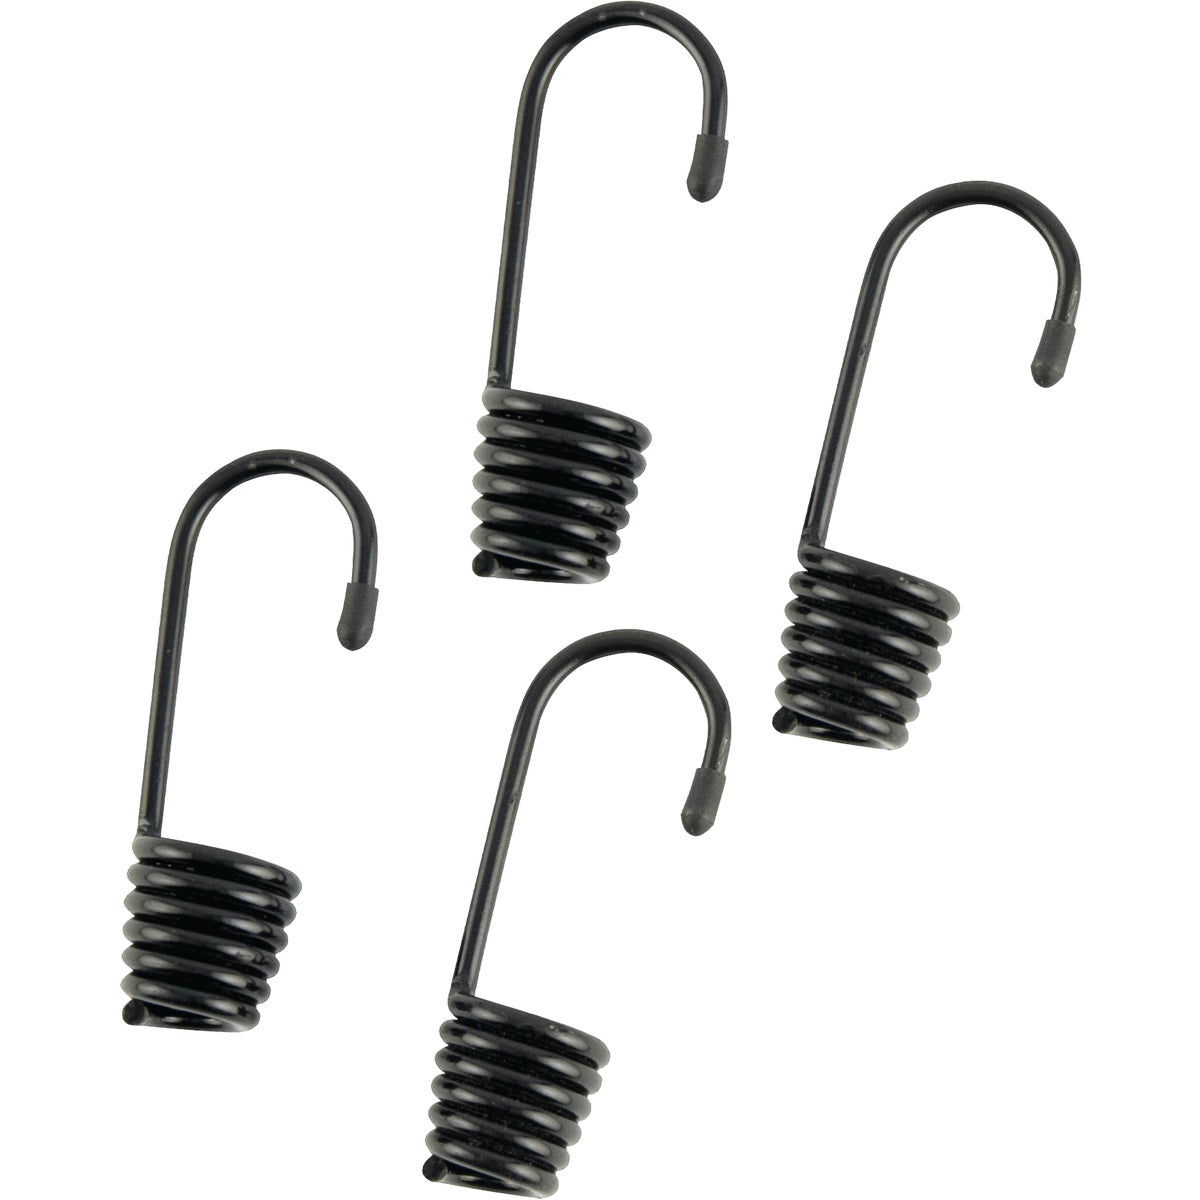 Item 573914, Replacement bungee/stretch cord metal hooks